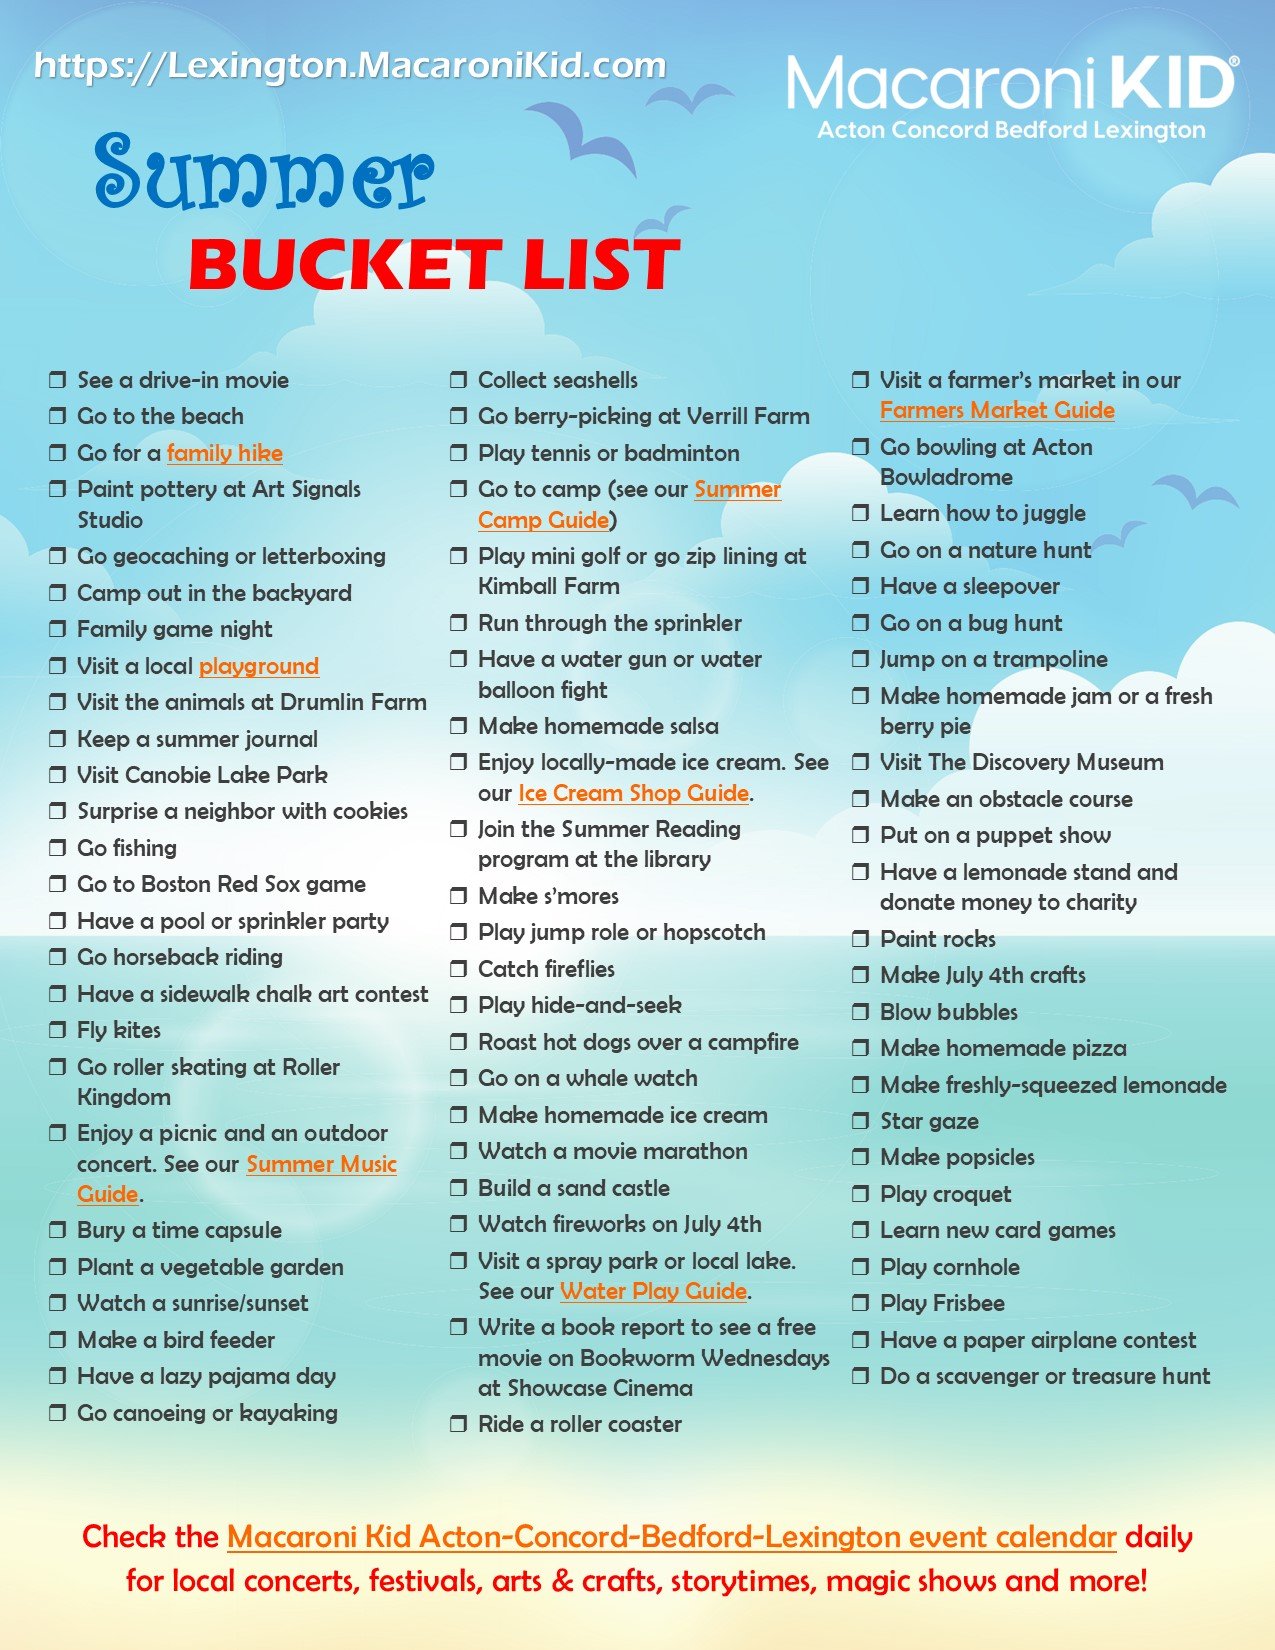 100+ Fun Ideas for a Summer Bucket List for Kids - From ABCs to ACTs